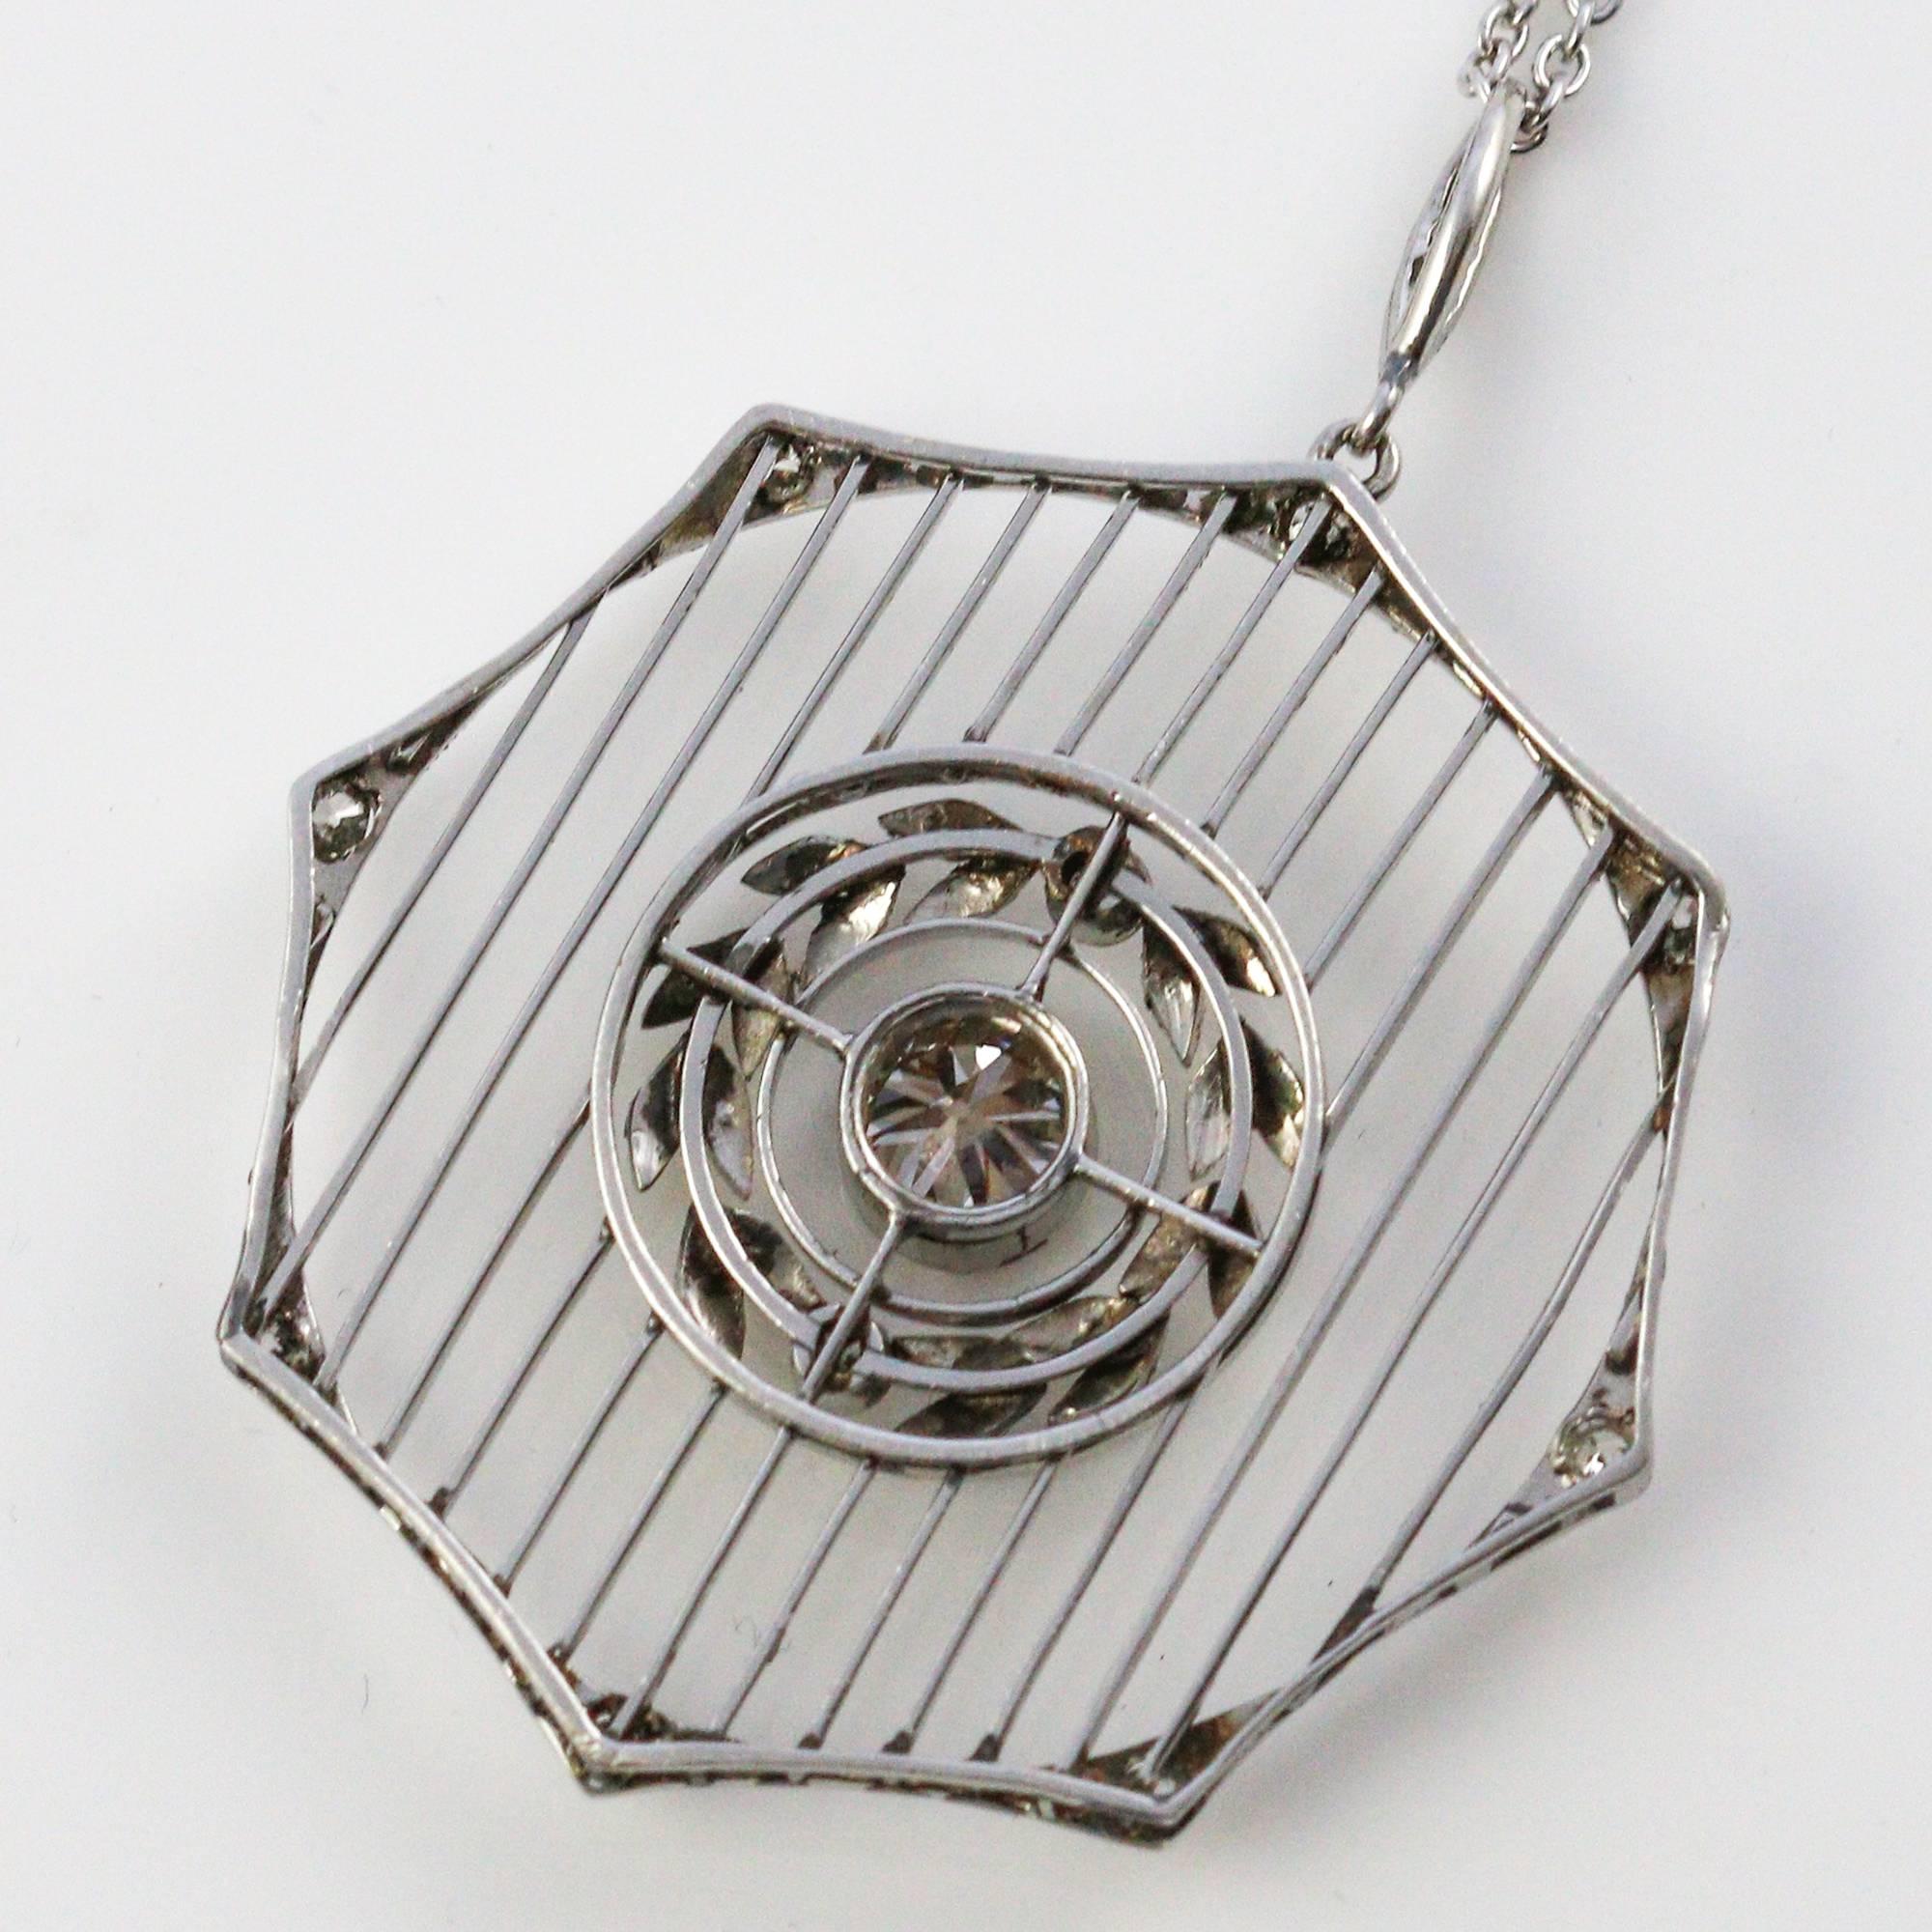 The center stone of this unique pendant is an old mine cut, which weighs approximately 0.45ct and grades as 